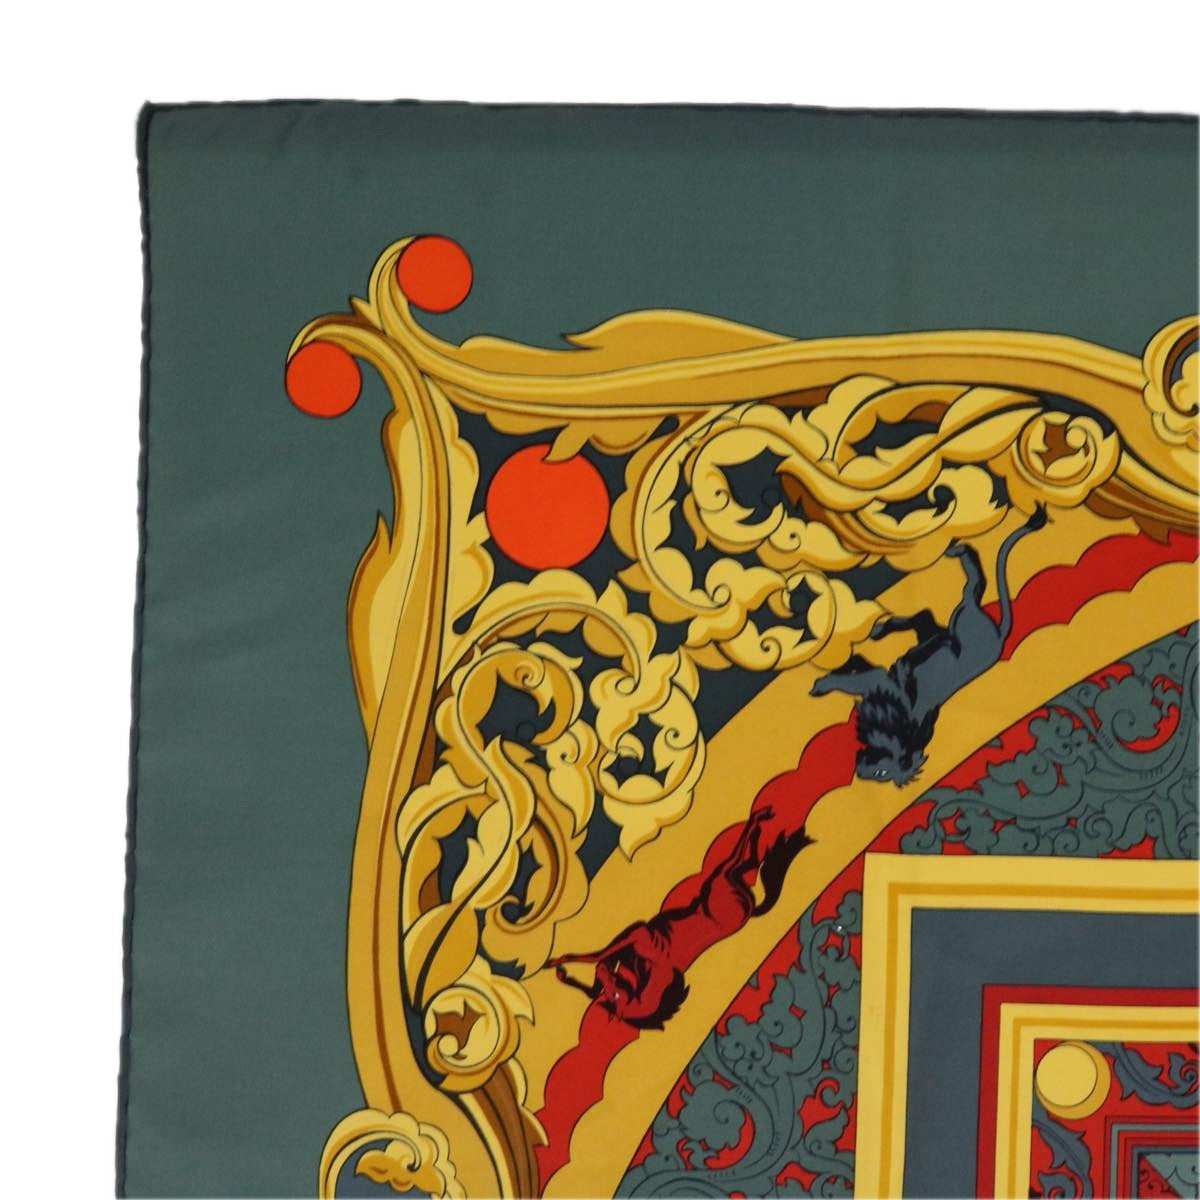 HERMES Carre 90 ANIMAUX SOLAIRES Scarf Silk Orange Auth bs11423